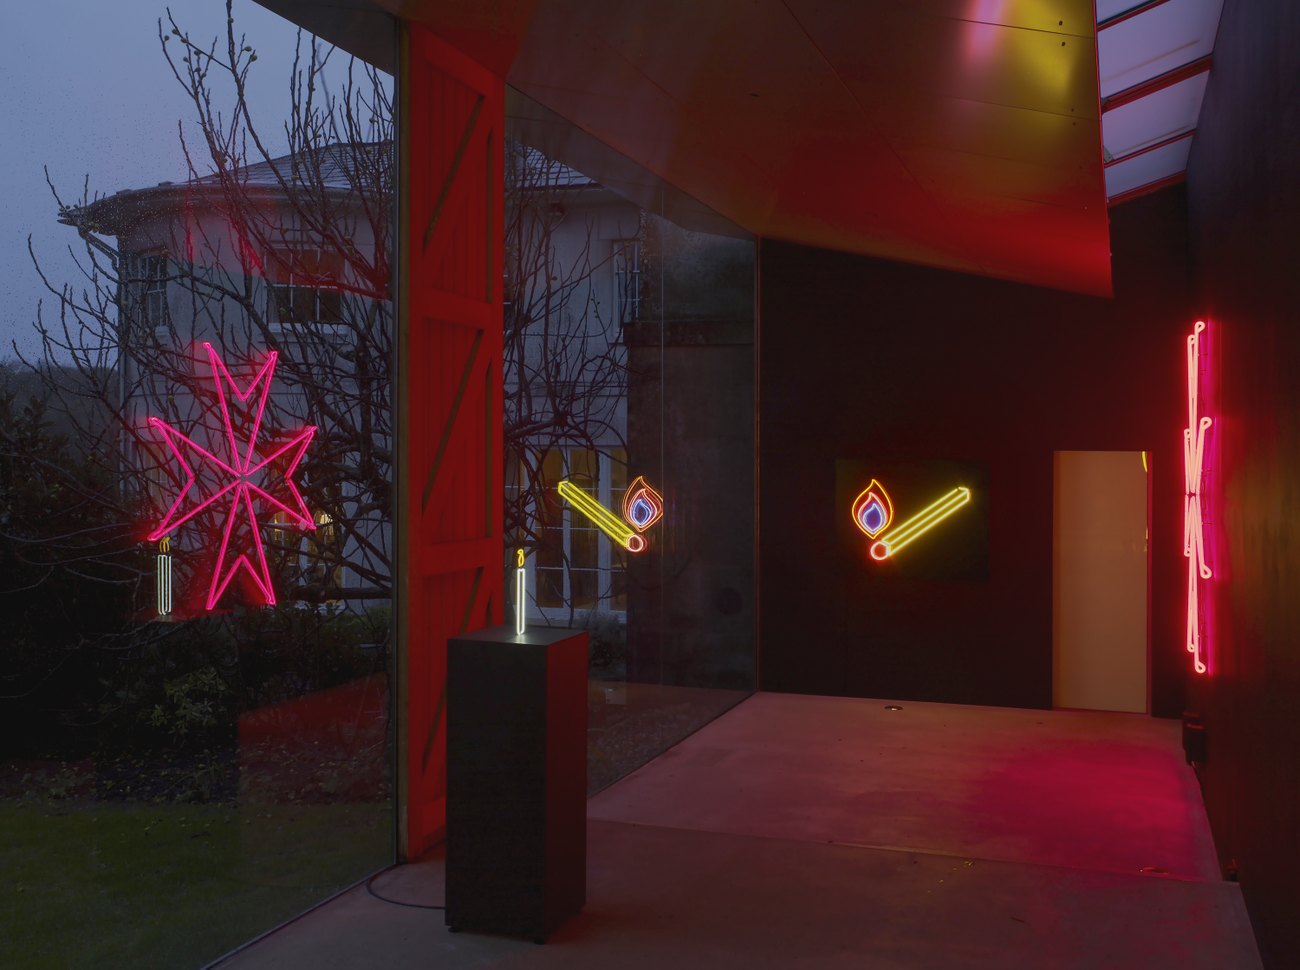 A yellow and red matchtstick with flame and a red neon maltese cross against black backdrops reflected a glass window